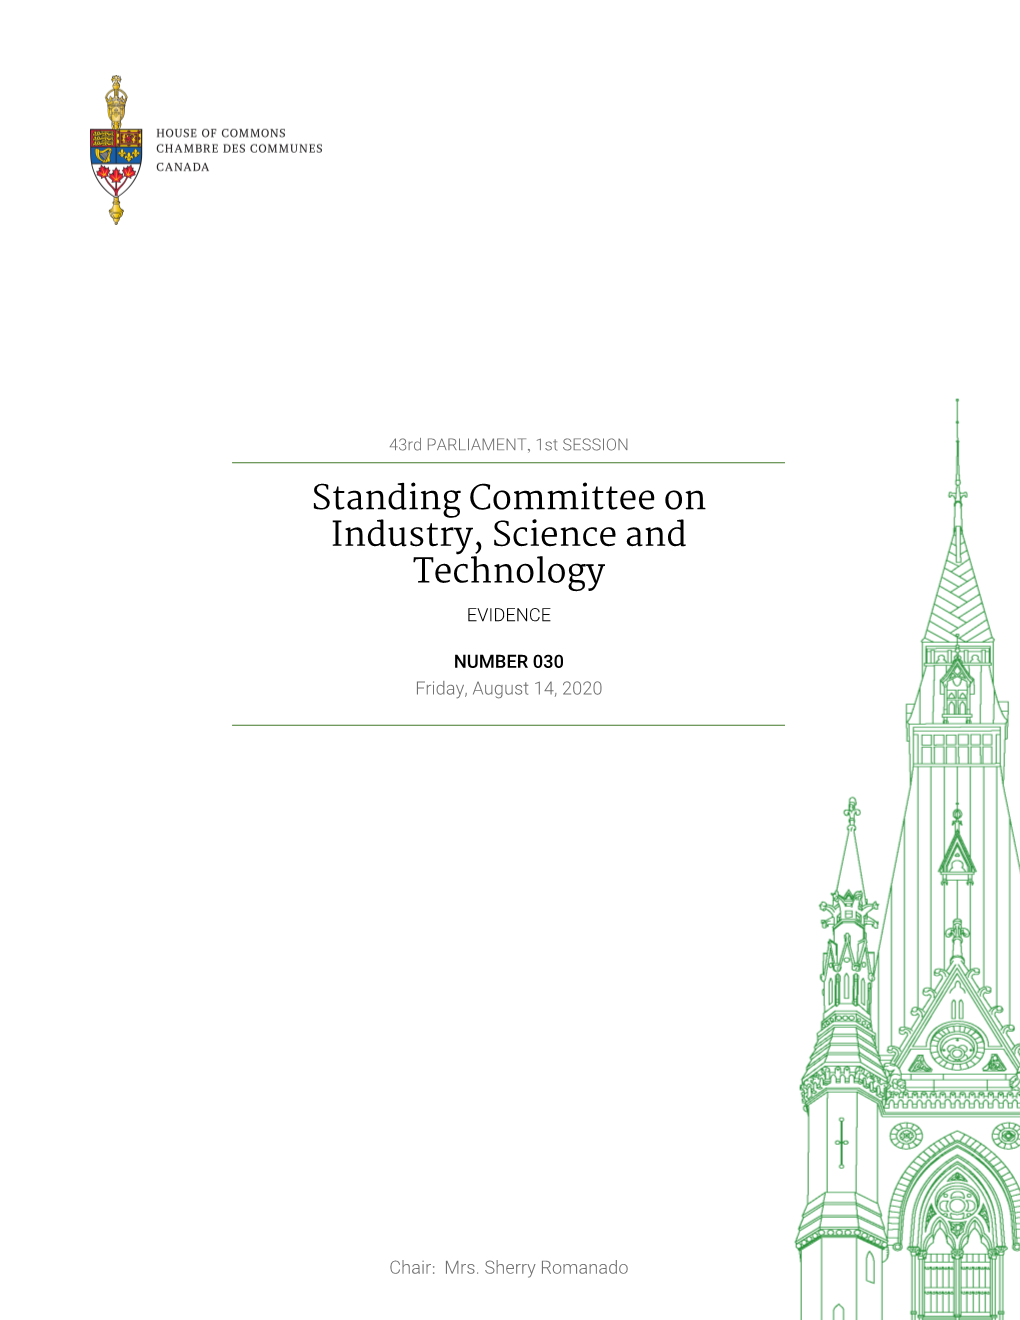 Evidence of the Standing Committee on Industry, Science And